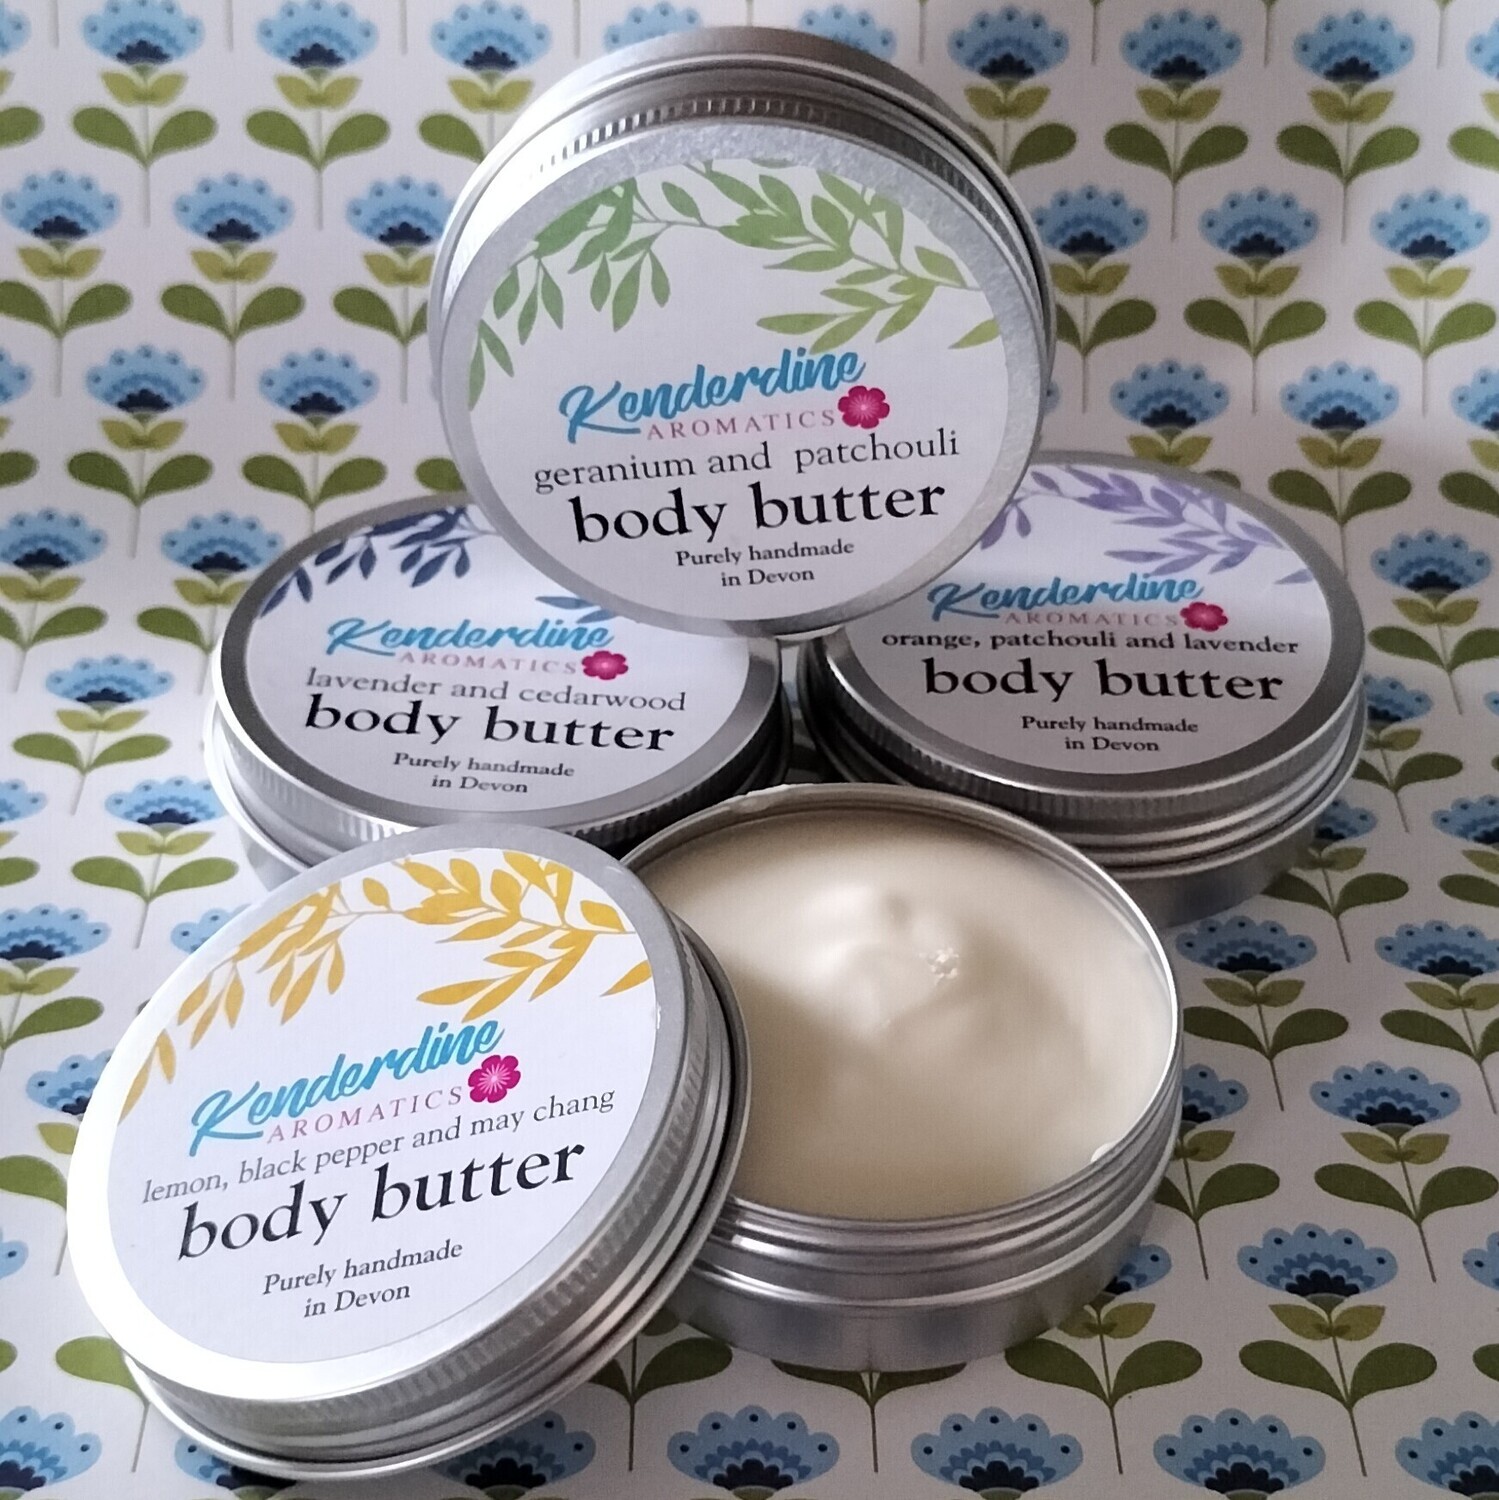 Body butter - lemon, black pepper and may chang